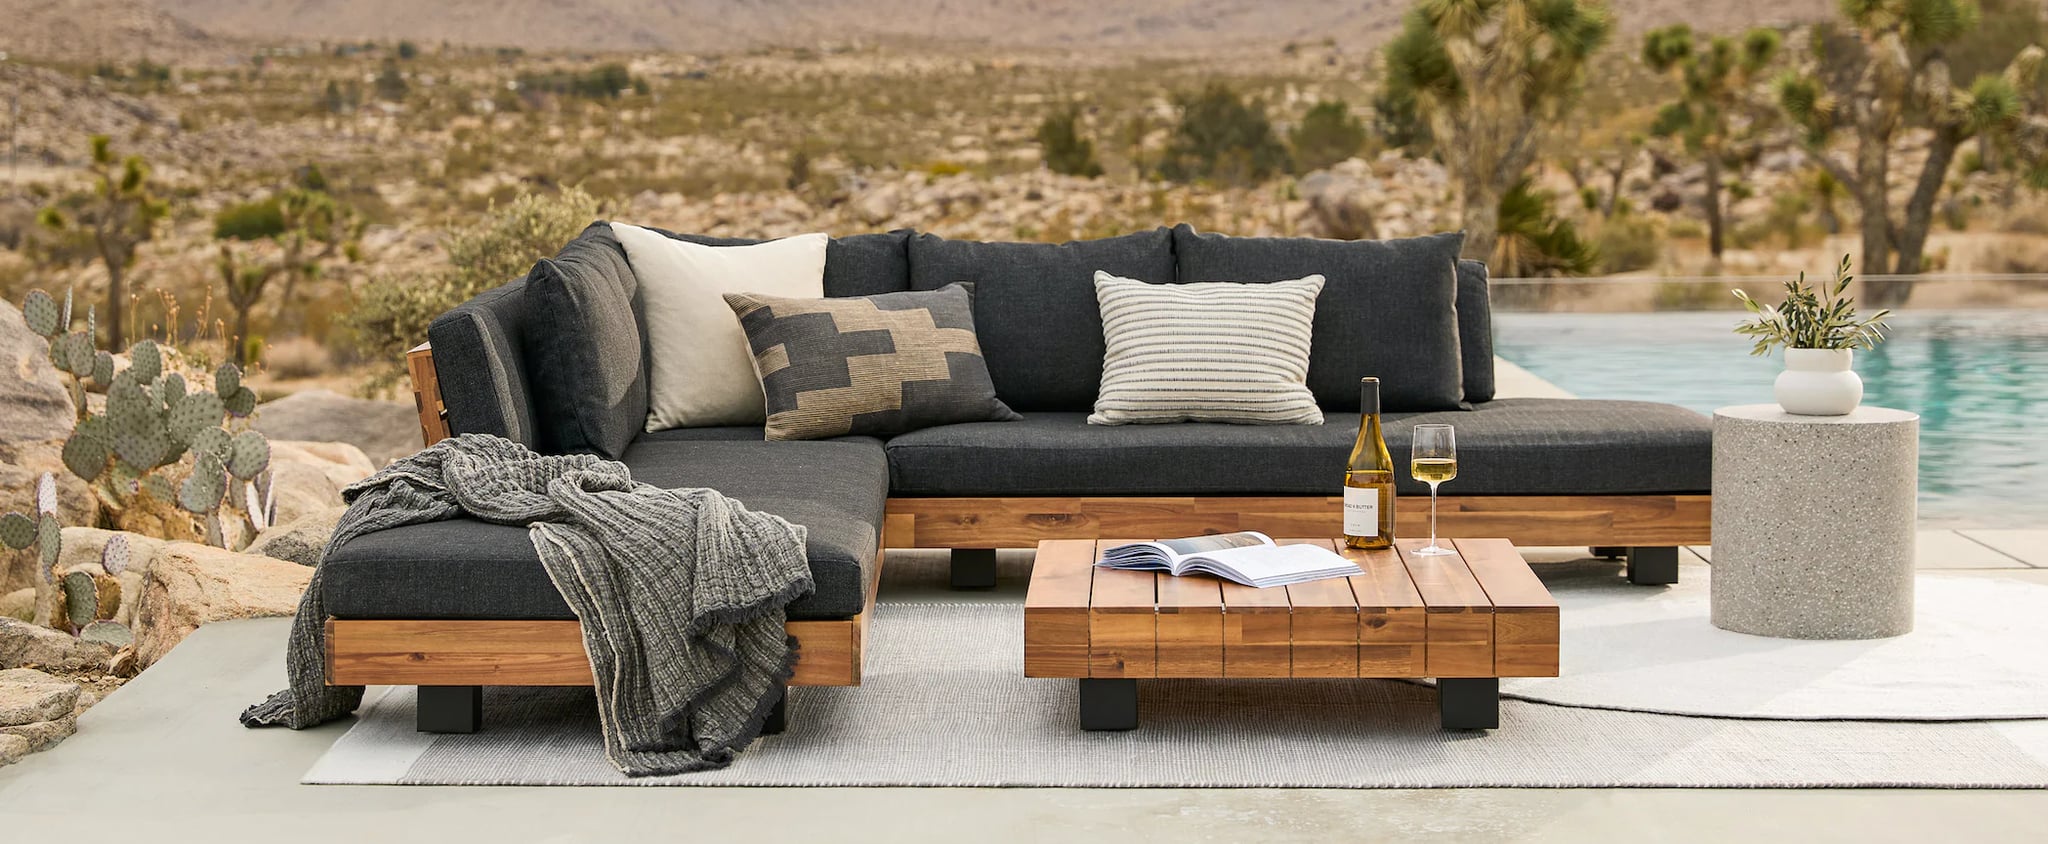 The Most Comfortable Outdoor Furniture to Shop